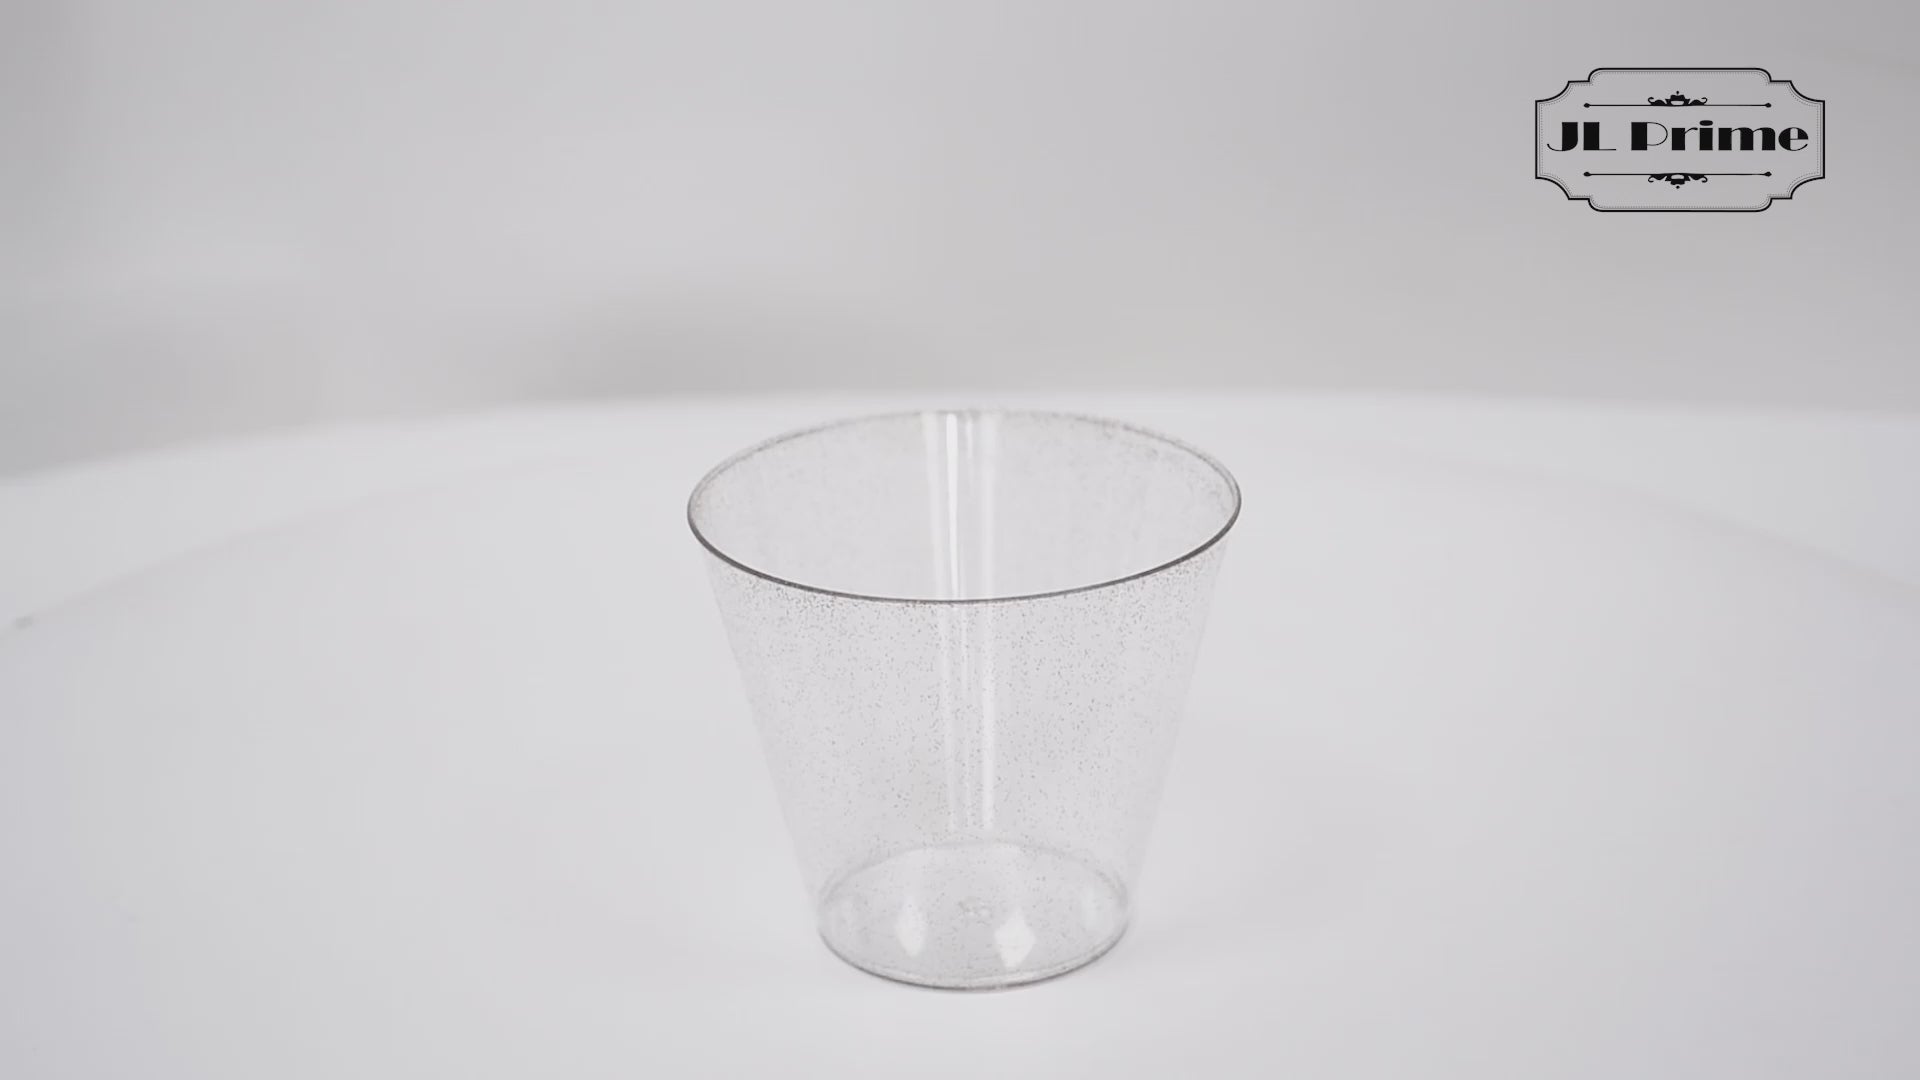 10 oz Clear Plastic Cups Old Fashioned Tumblers Gold Rimmed